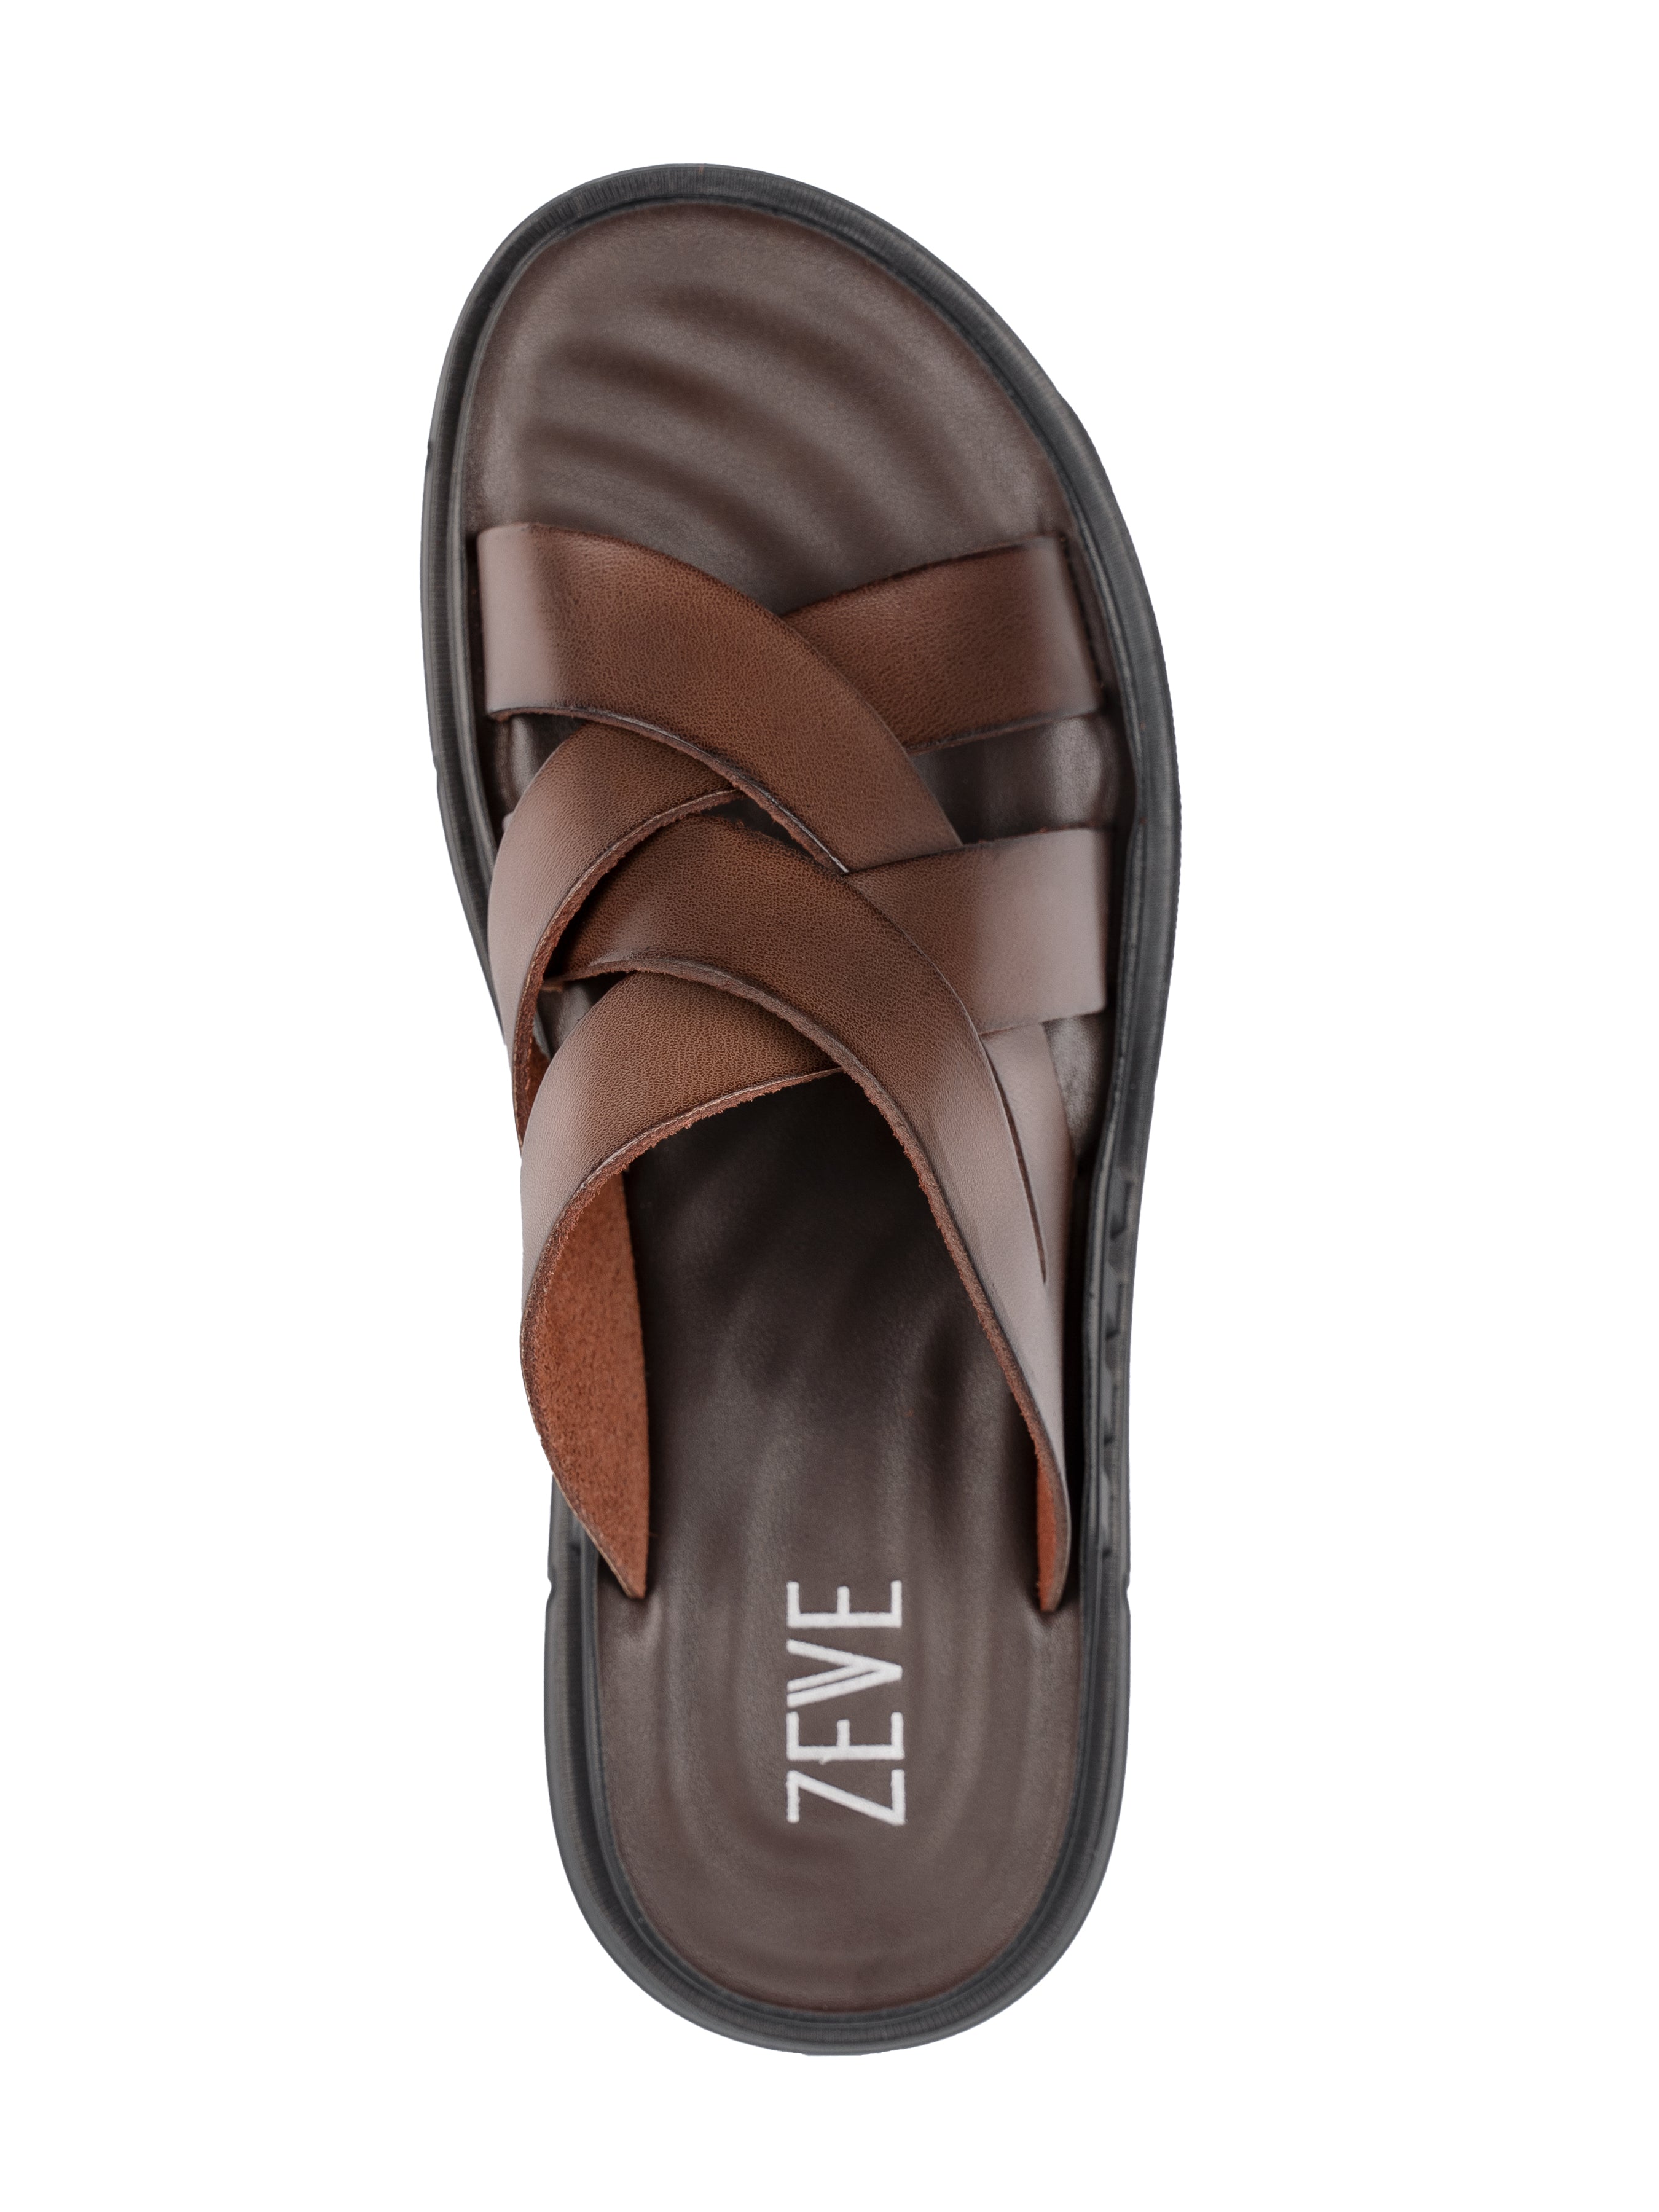 Remy Sandal - Coffee Leather